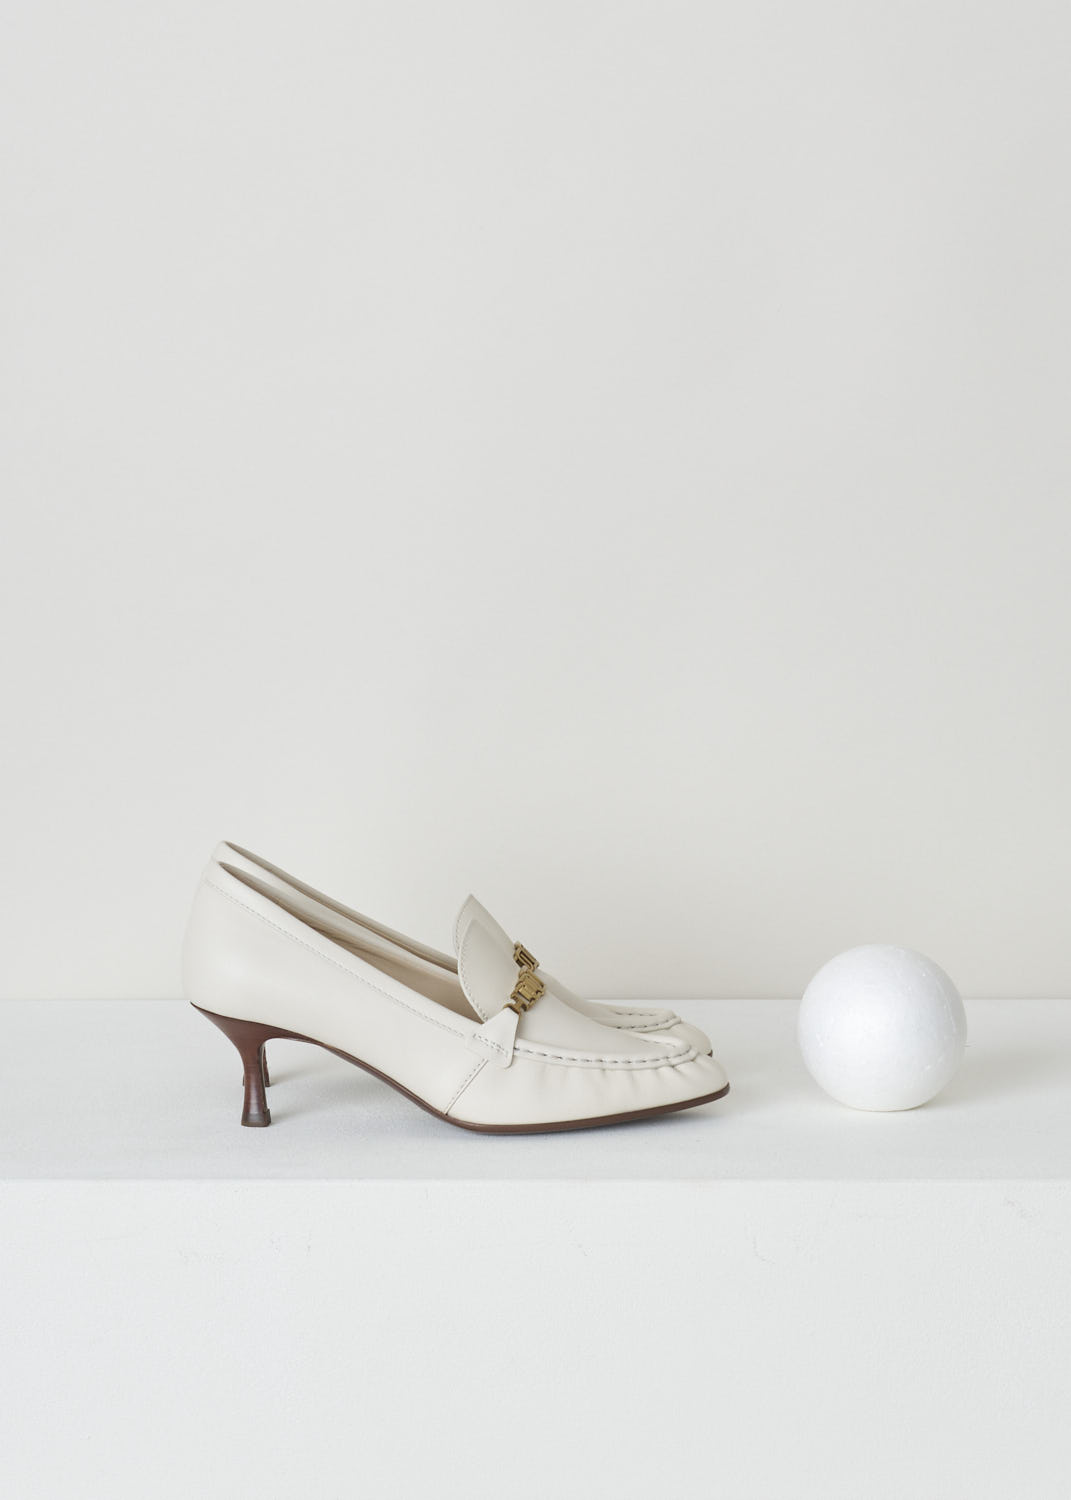 TODS, OFF-WHITE LEATHER LOAFERS WITH A TRAPEZOID HEEL, XXW09D0EC80_MID_B015, White, Side, Off-white leather loafers with a wooden trapezoid heel. This model has a pointed toe and a gold-toned buckle decorating the front. Around the trim, the leather is subtly pleated.


Heel height: 6 cm / 2.3 inch. 
